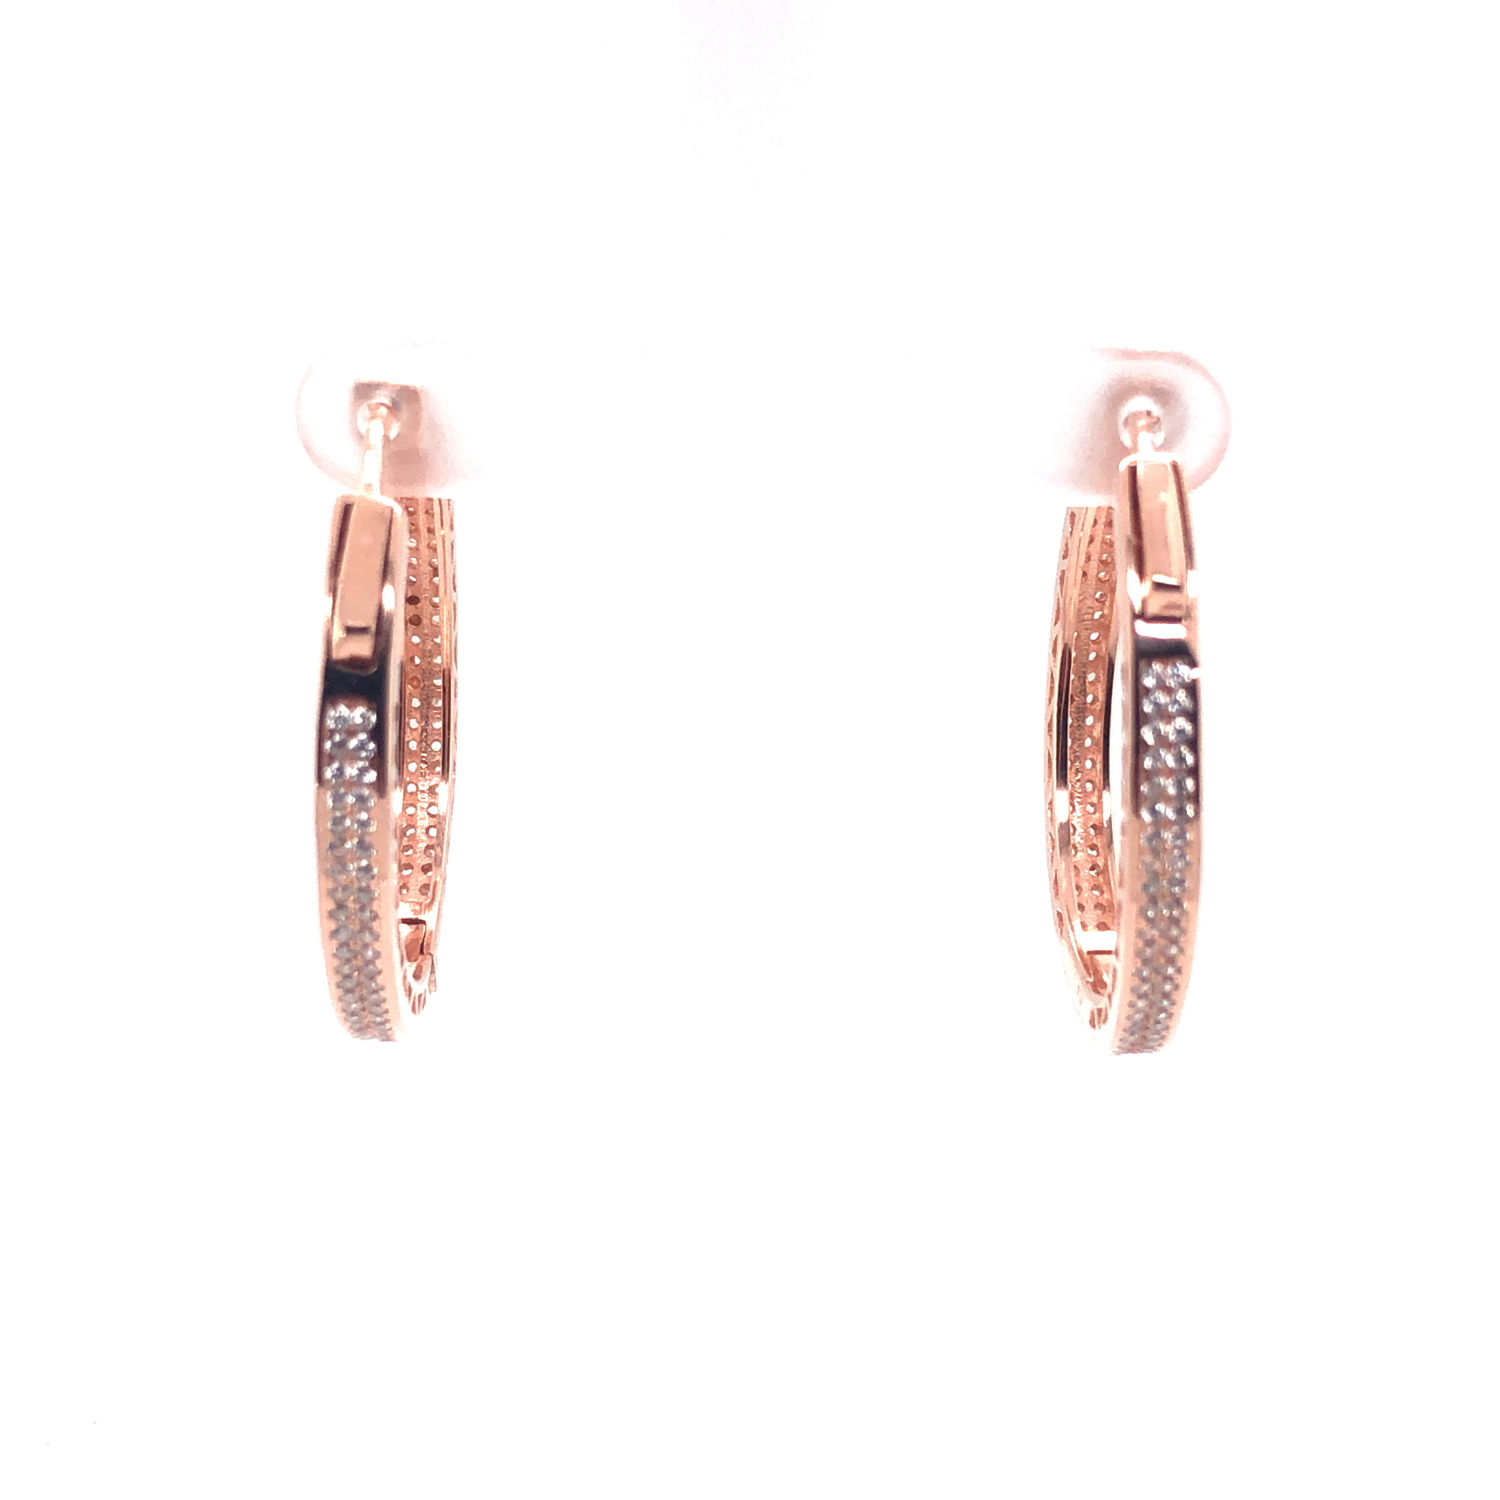 A PAIR OF SILVER AND ROSE GOLD PLATED CUBIC ZIRCONIA CHANNEL SET EARRINGS 3.1cm. WEIGHT 9.6grms.